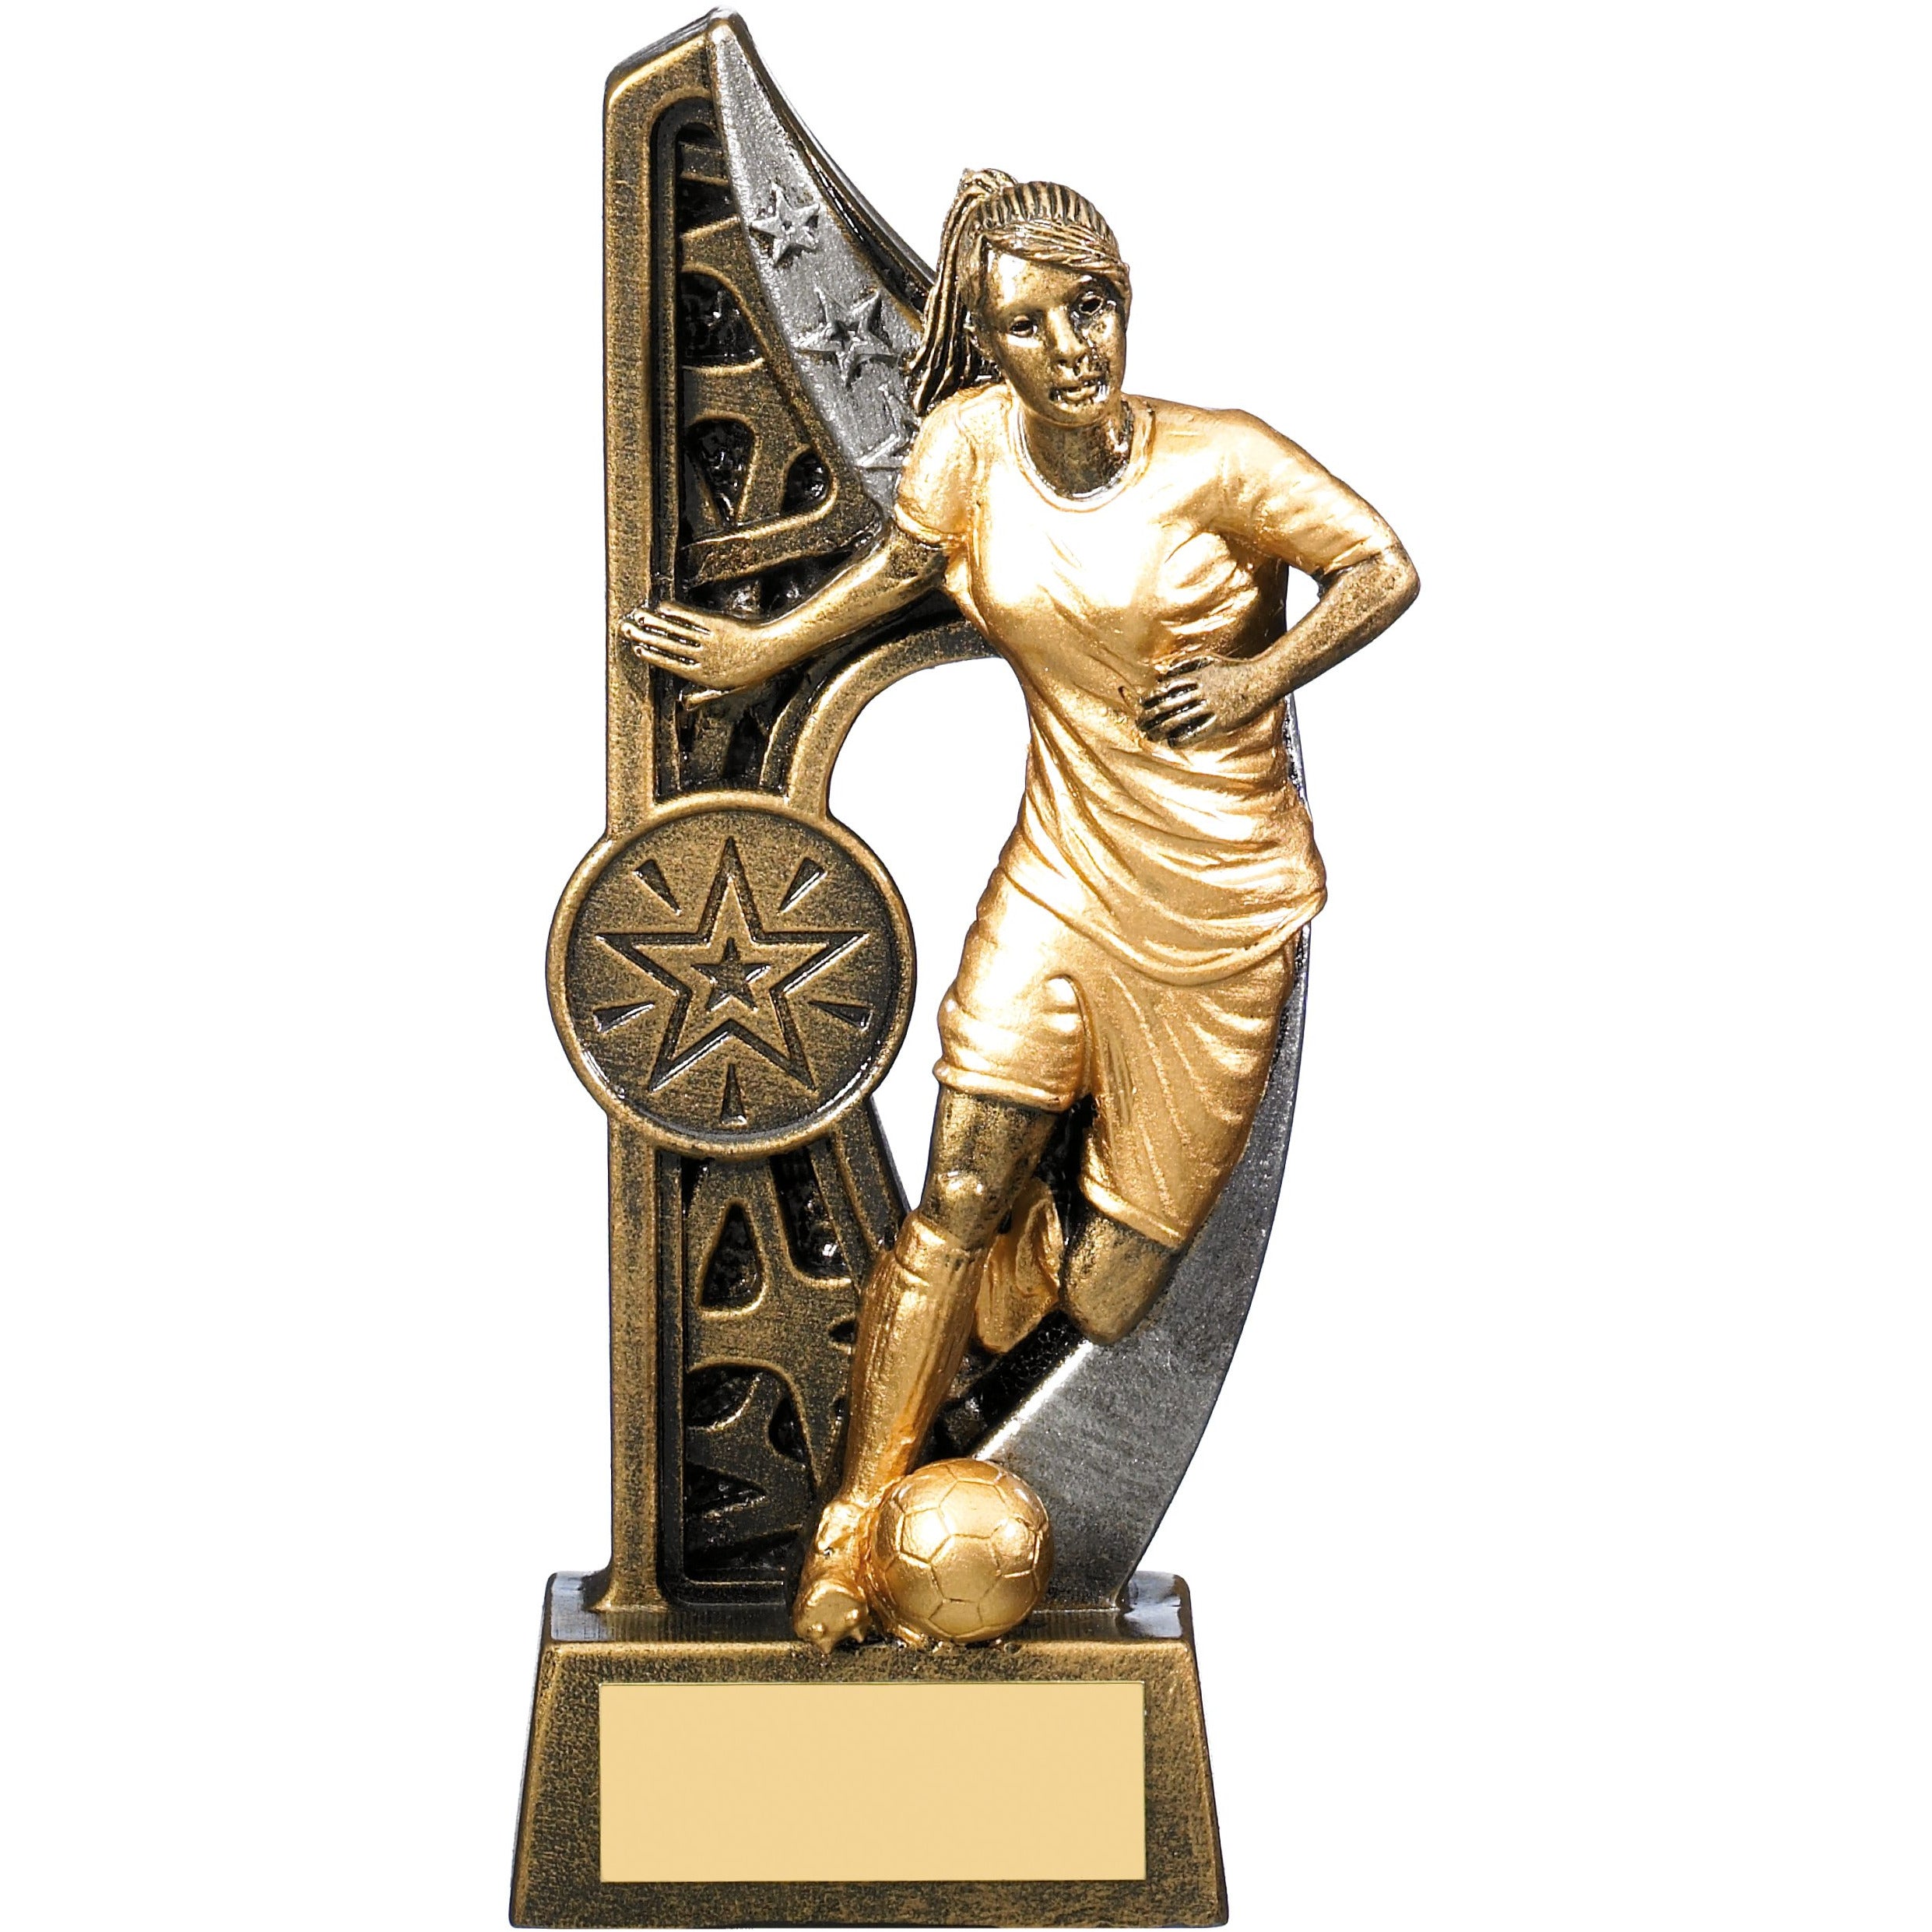 Imperius Male Football Figurine Trophy